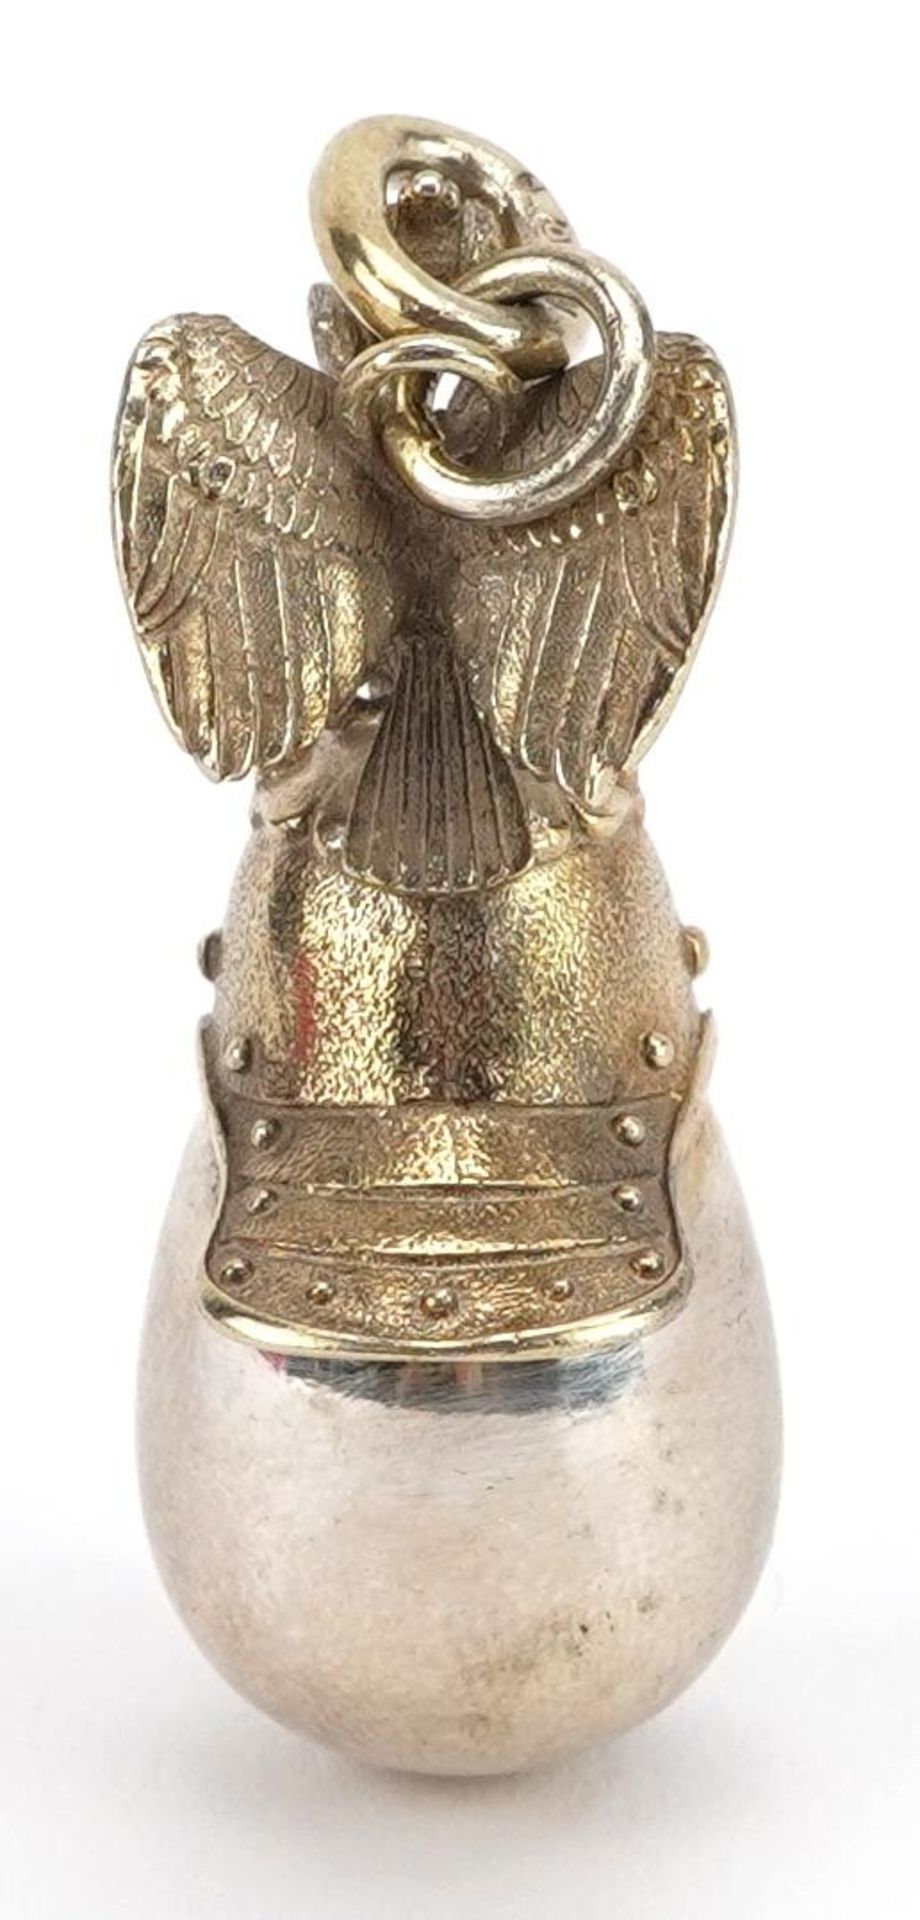 Russian military interest silver egg pendant with helmet and double headed eagle, 3.5cm high, 12.4g - Image 2 of 4